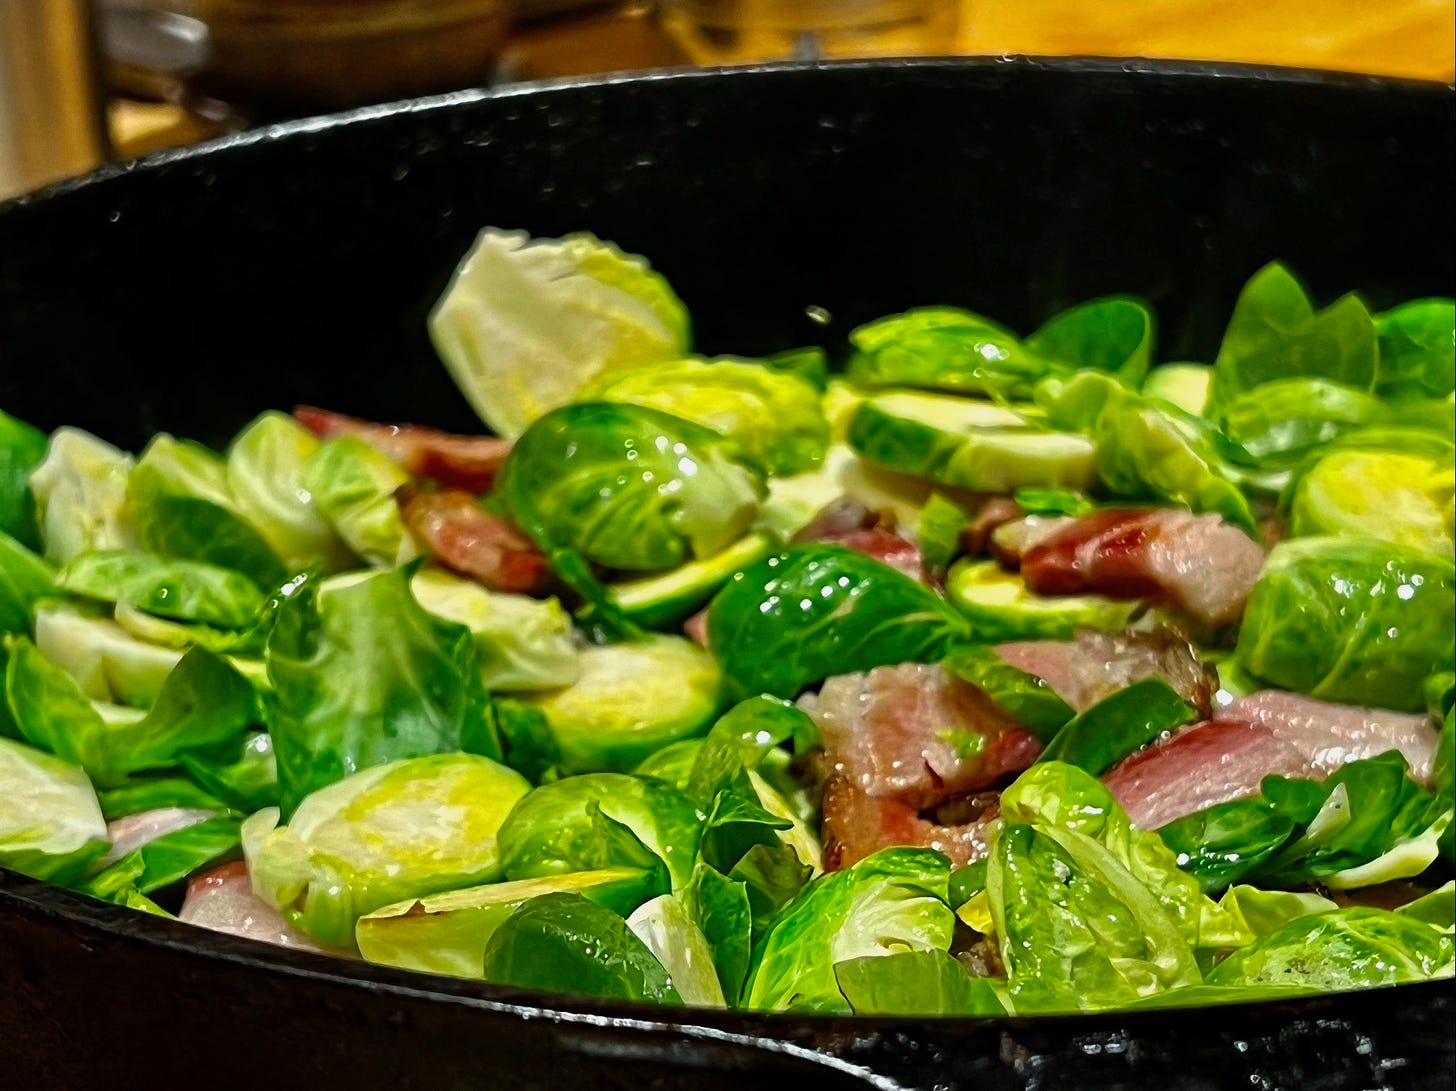 A cast iron pan of bright green brussel sprouts, sliced into rounds, cooking with small strips of bacon.